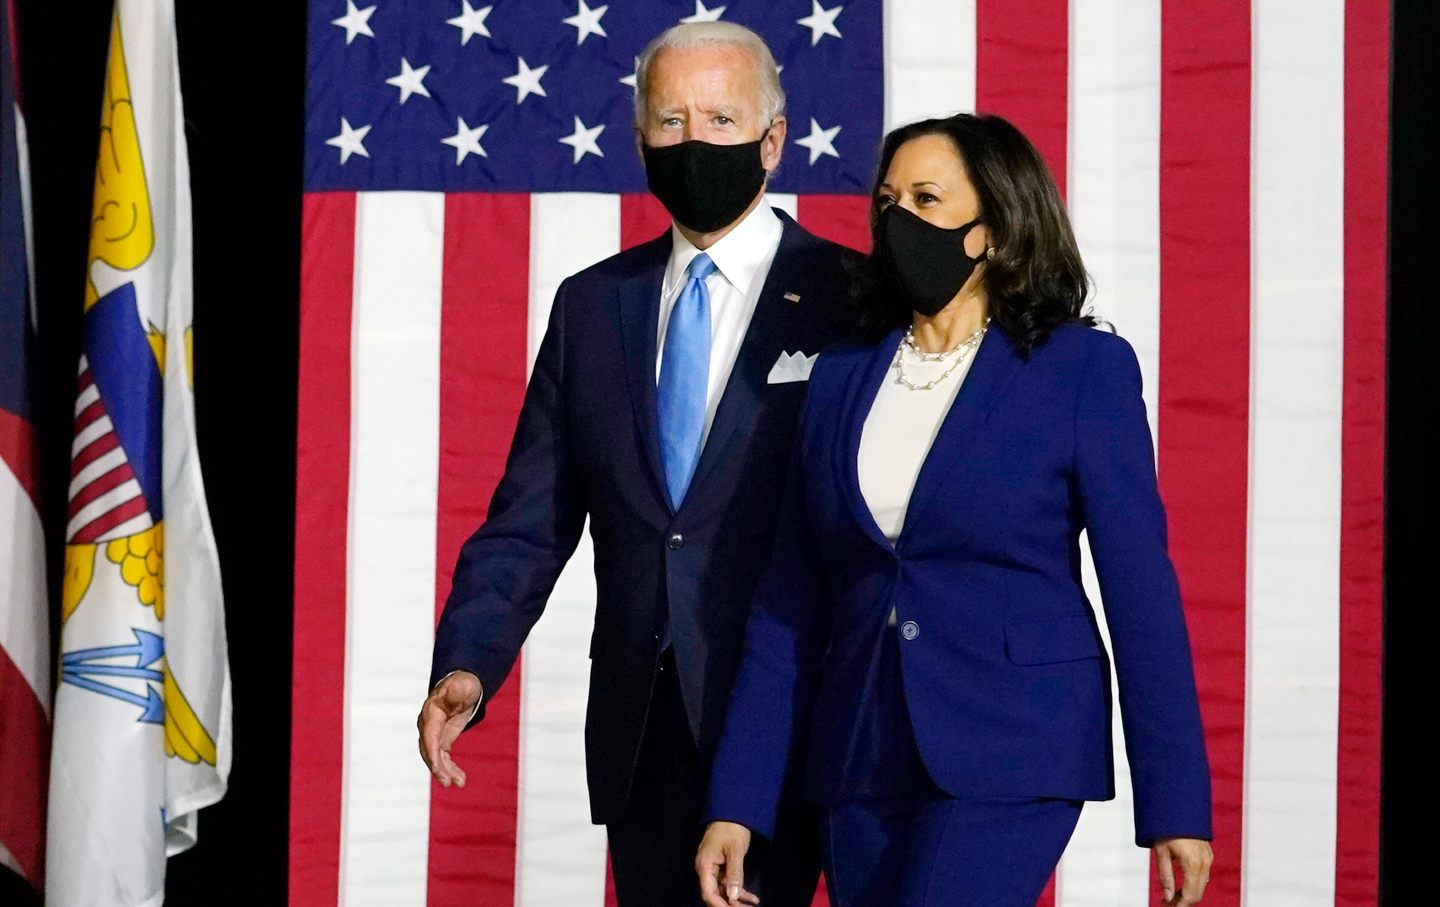 Biden and Kamala walking in front of an American flag